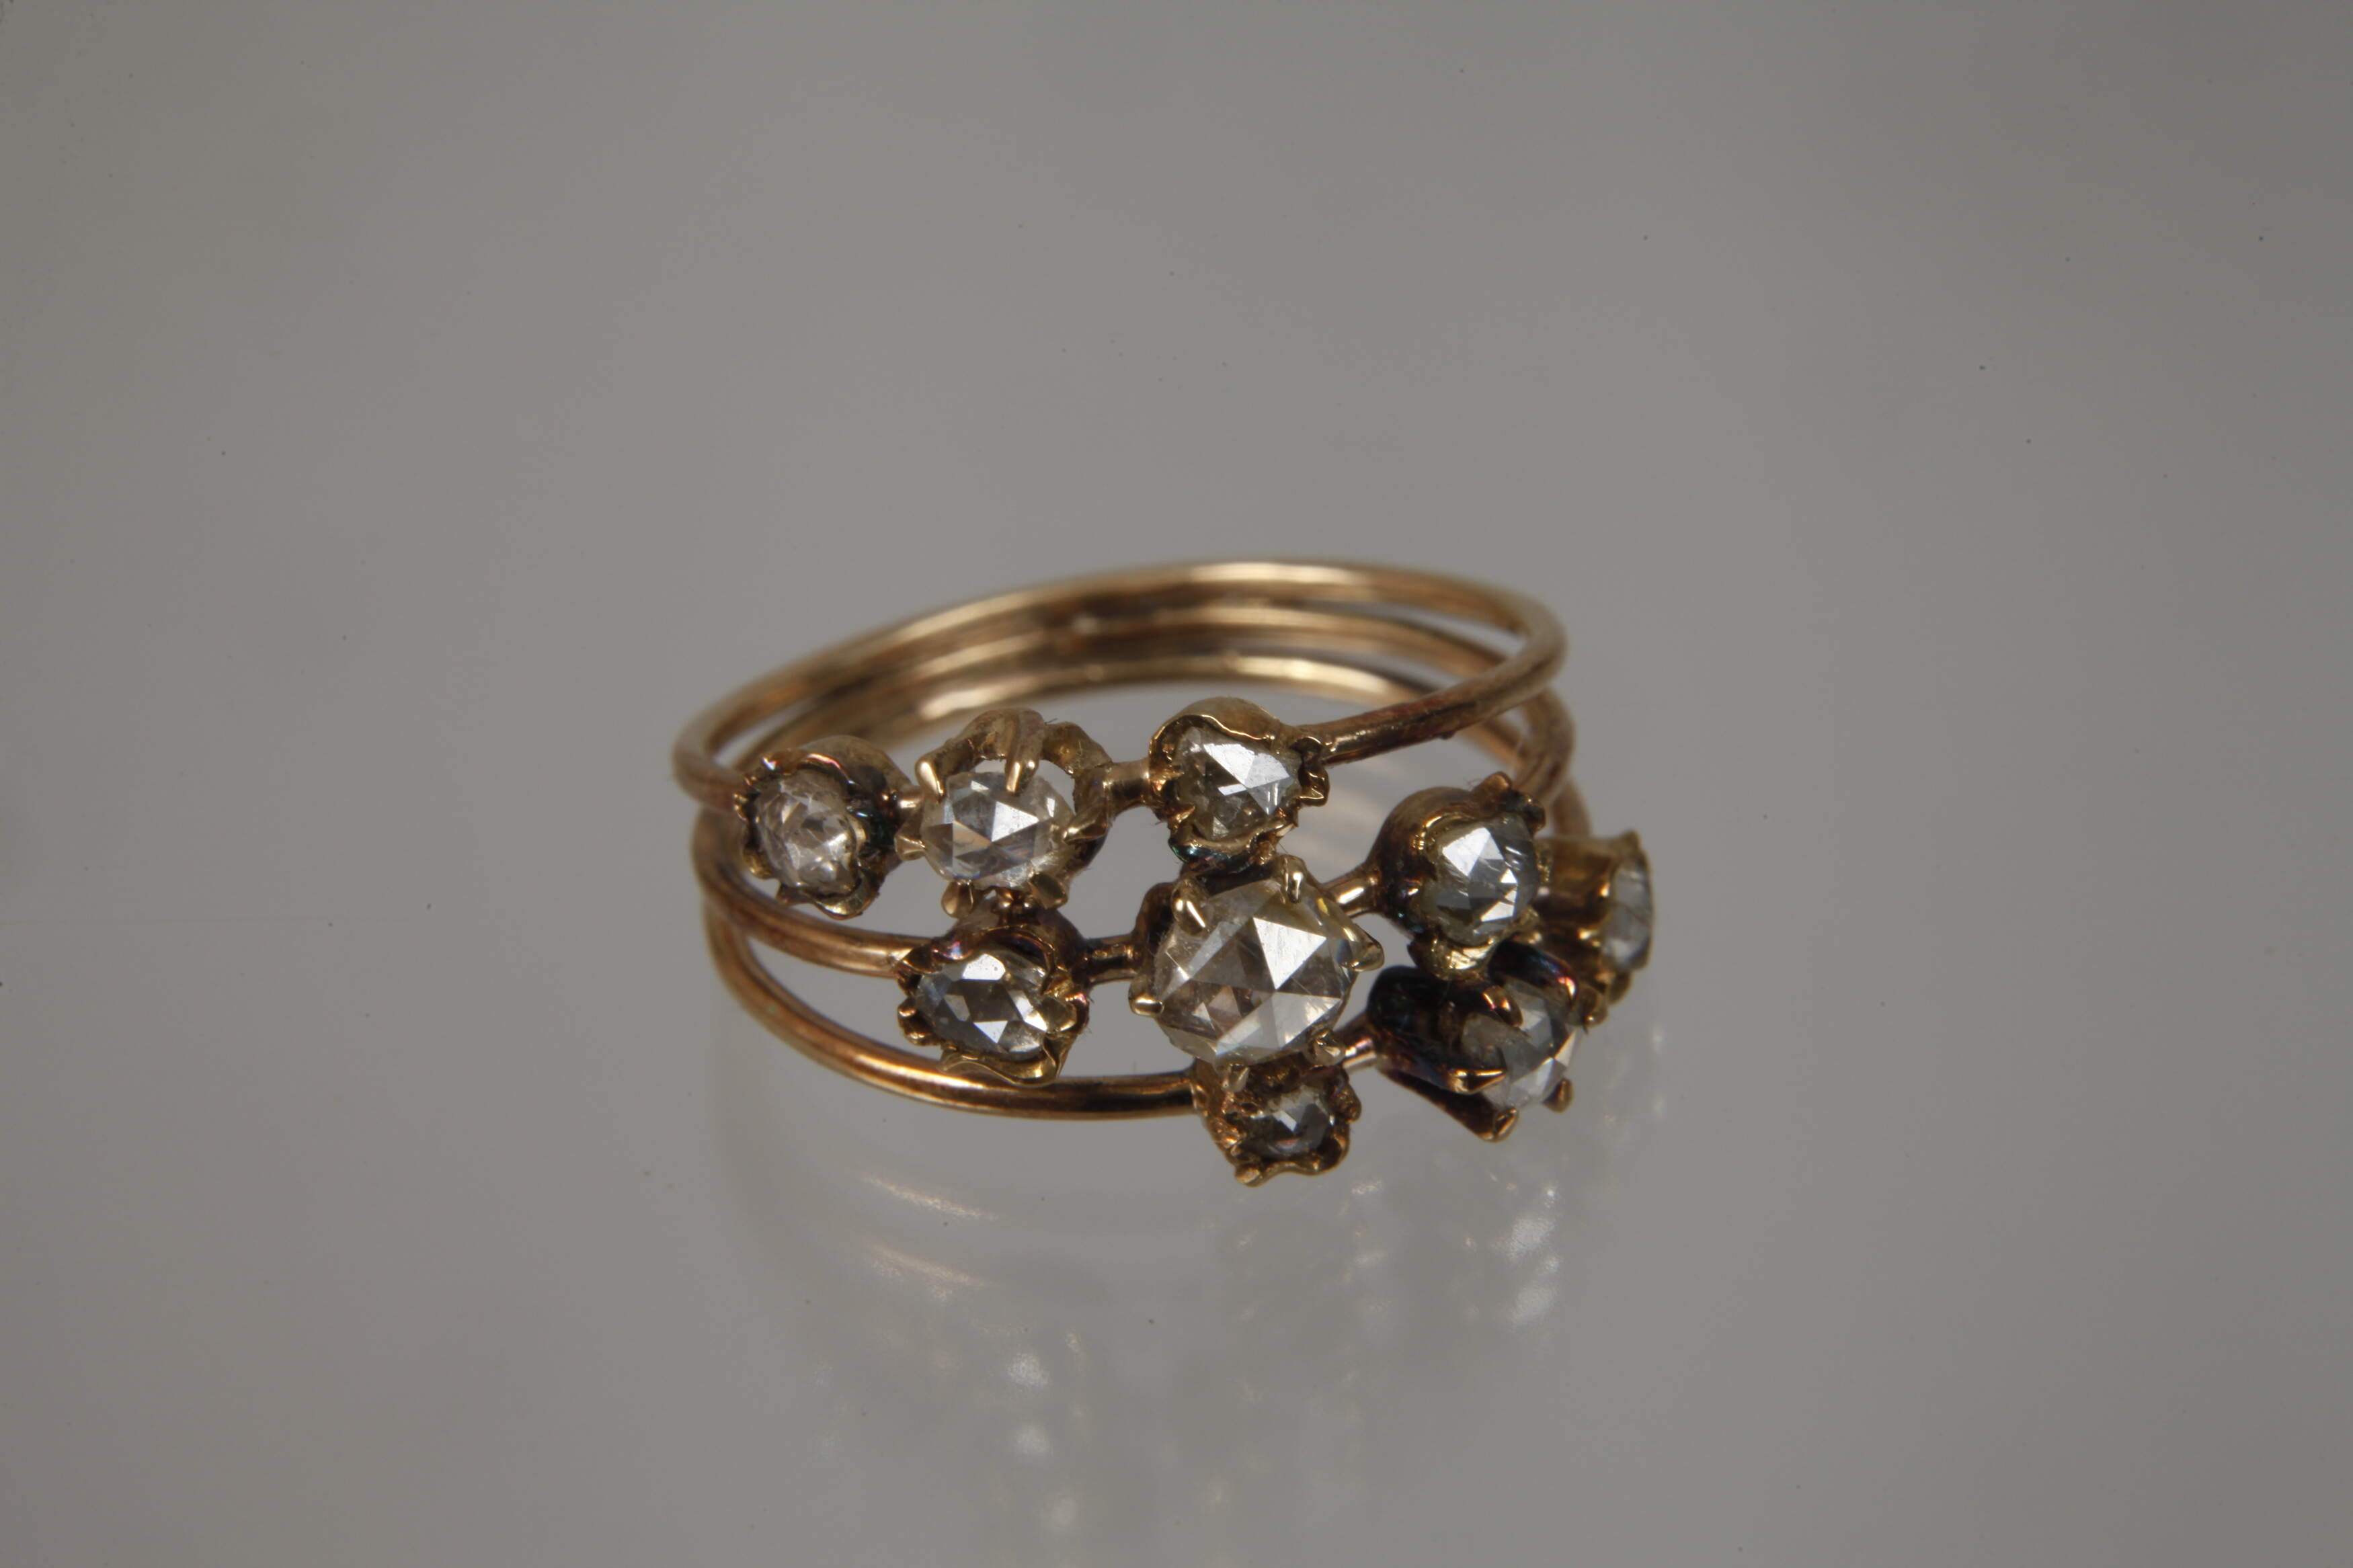 Historic ring with diamond roses - Image 3 of 5